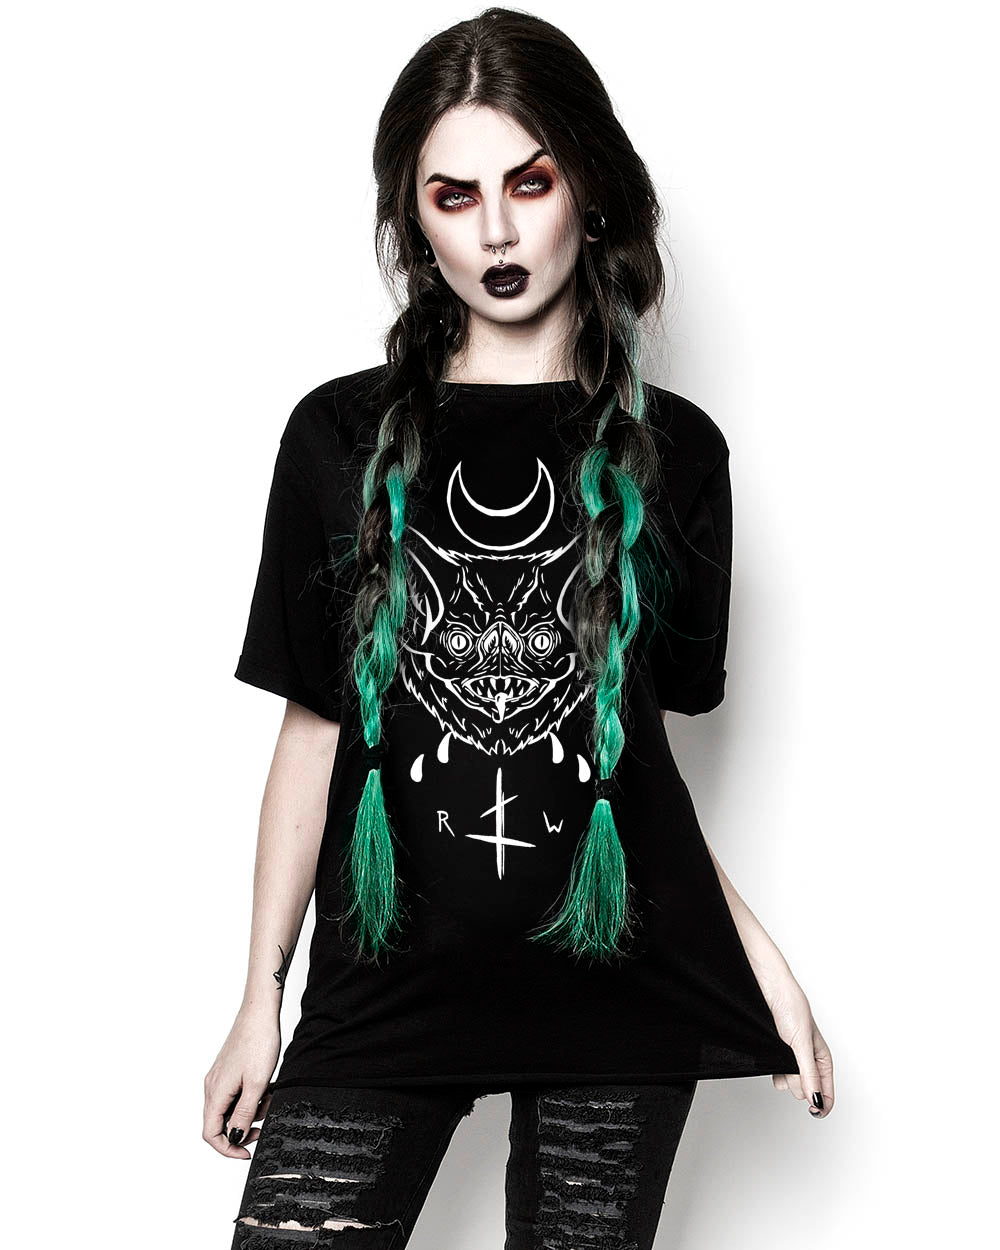 Bat Face Tee - Alt Goth Unisex T-Shirt Grunge Aesthetic Witchy Top Vegan Clothing Cool Fun Gifts